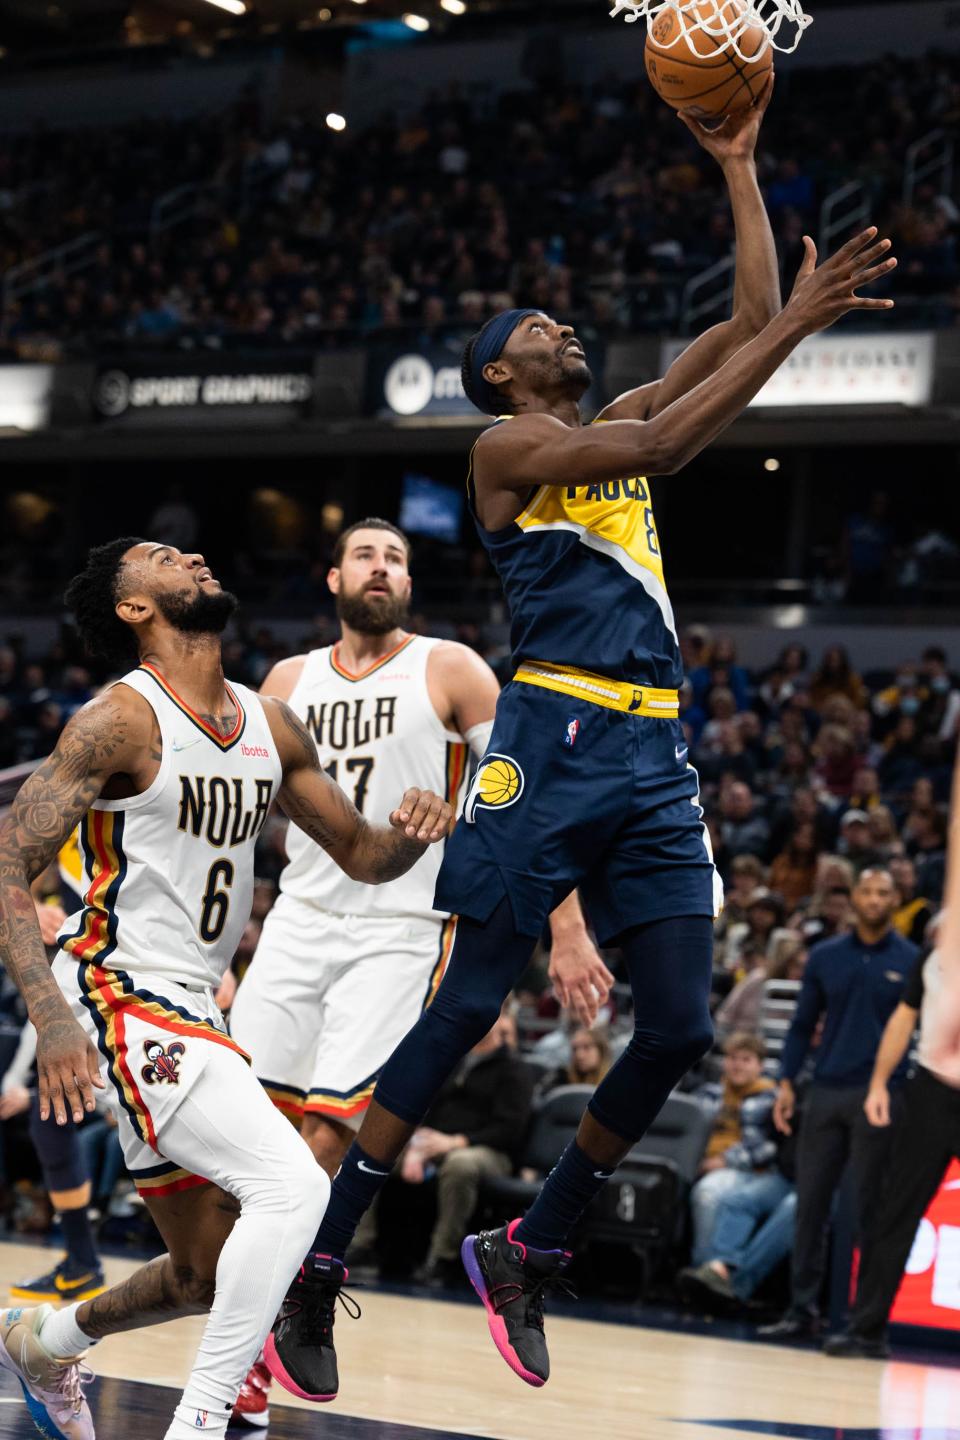 Nov 20, 2021; Indianapolis, Indiana, USA; Indiana Pacers forward Justin Holiday (8) shoots the ball while New Orleans Pelicans guard Nickeil Alexander-Walker (6) defends in the first half at Gainbridge Fieldhouse. Mandatory Credit: Trevor Ruszkowski-USA TODAY Sports